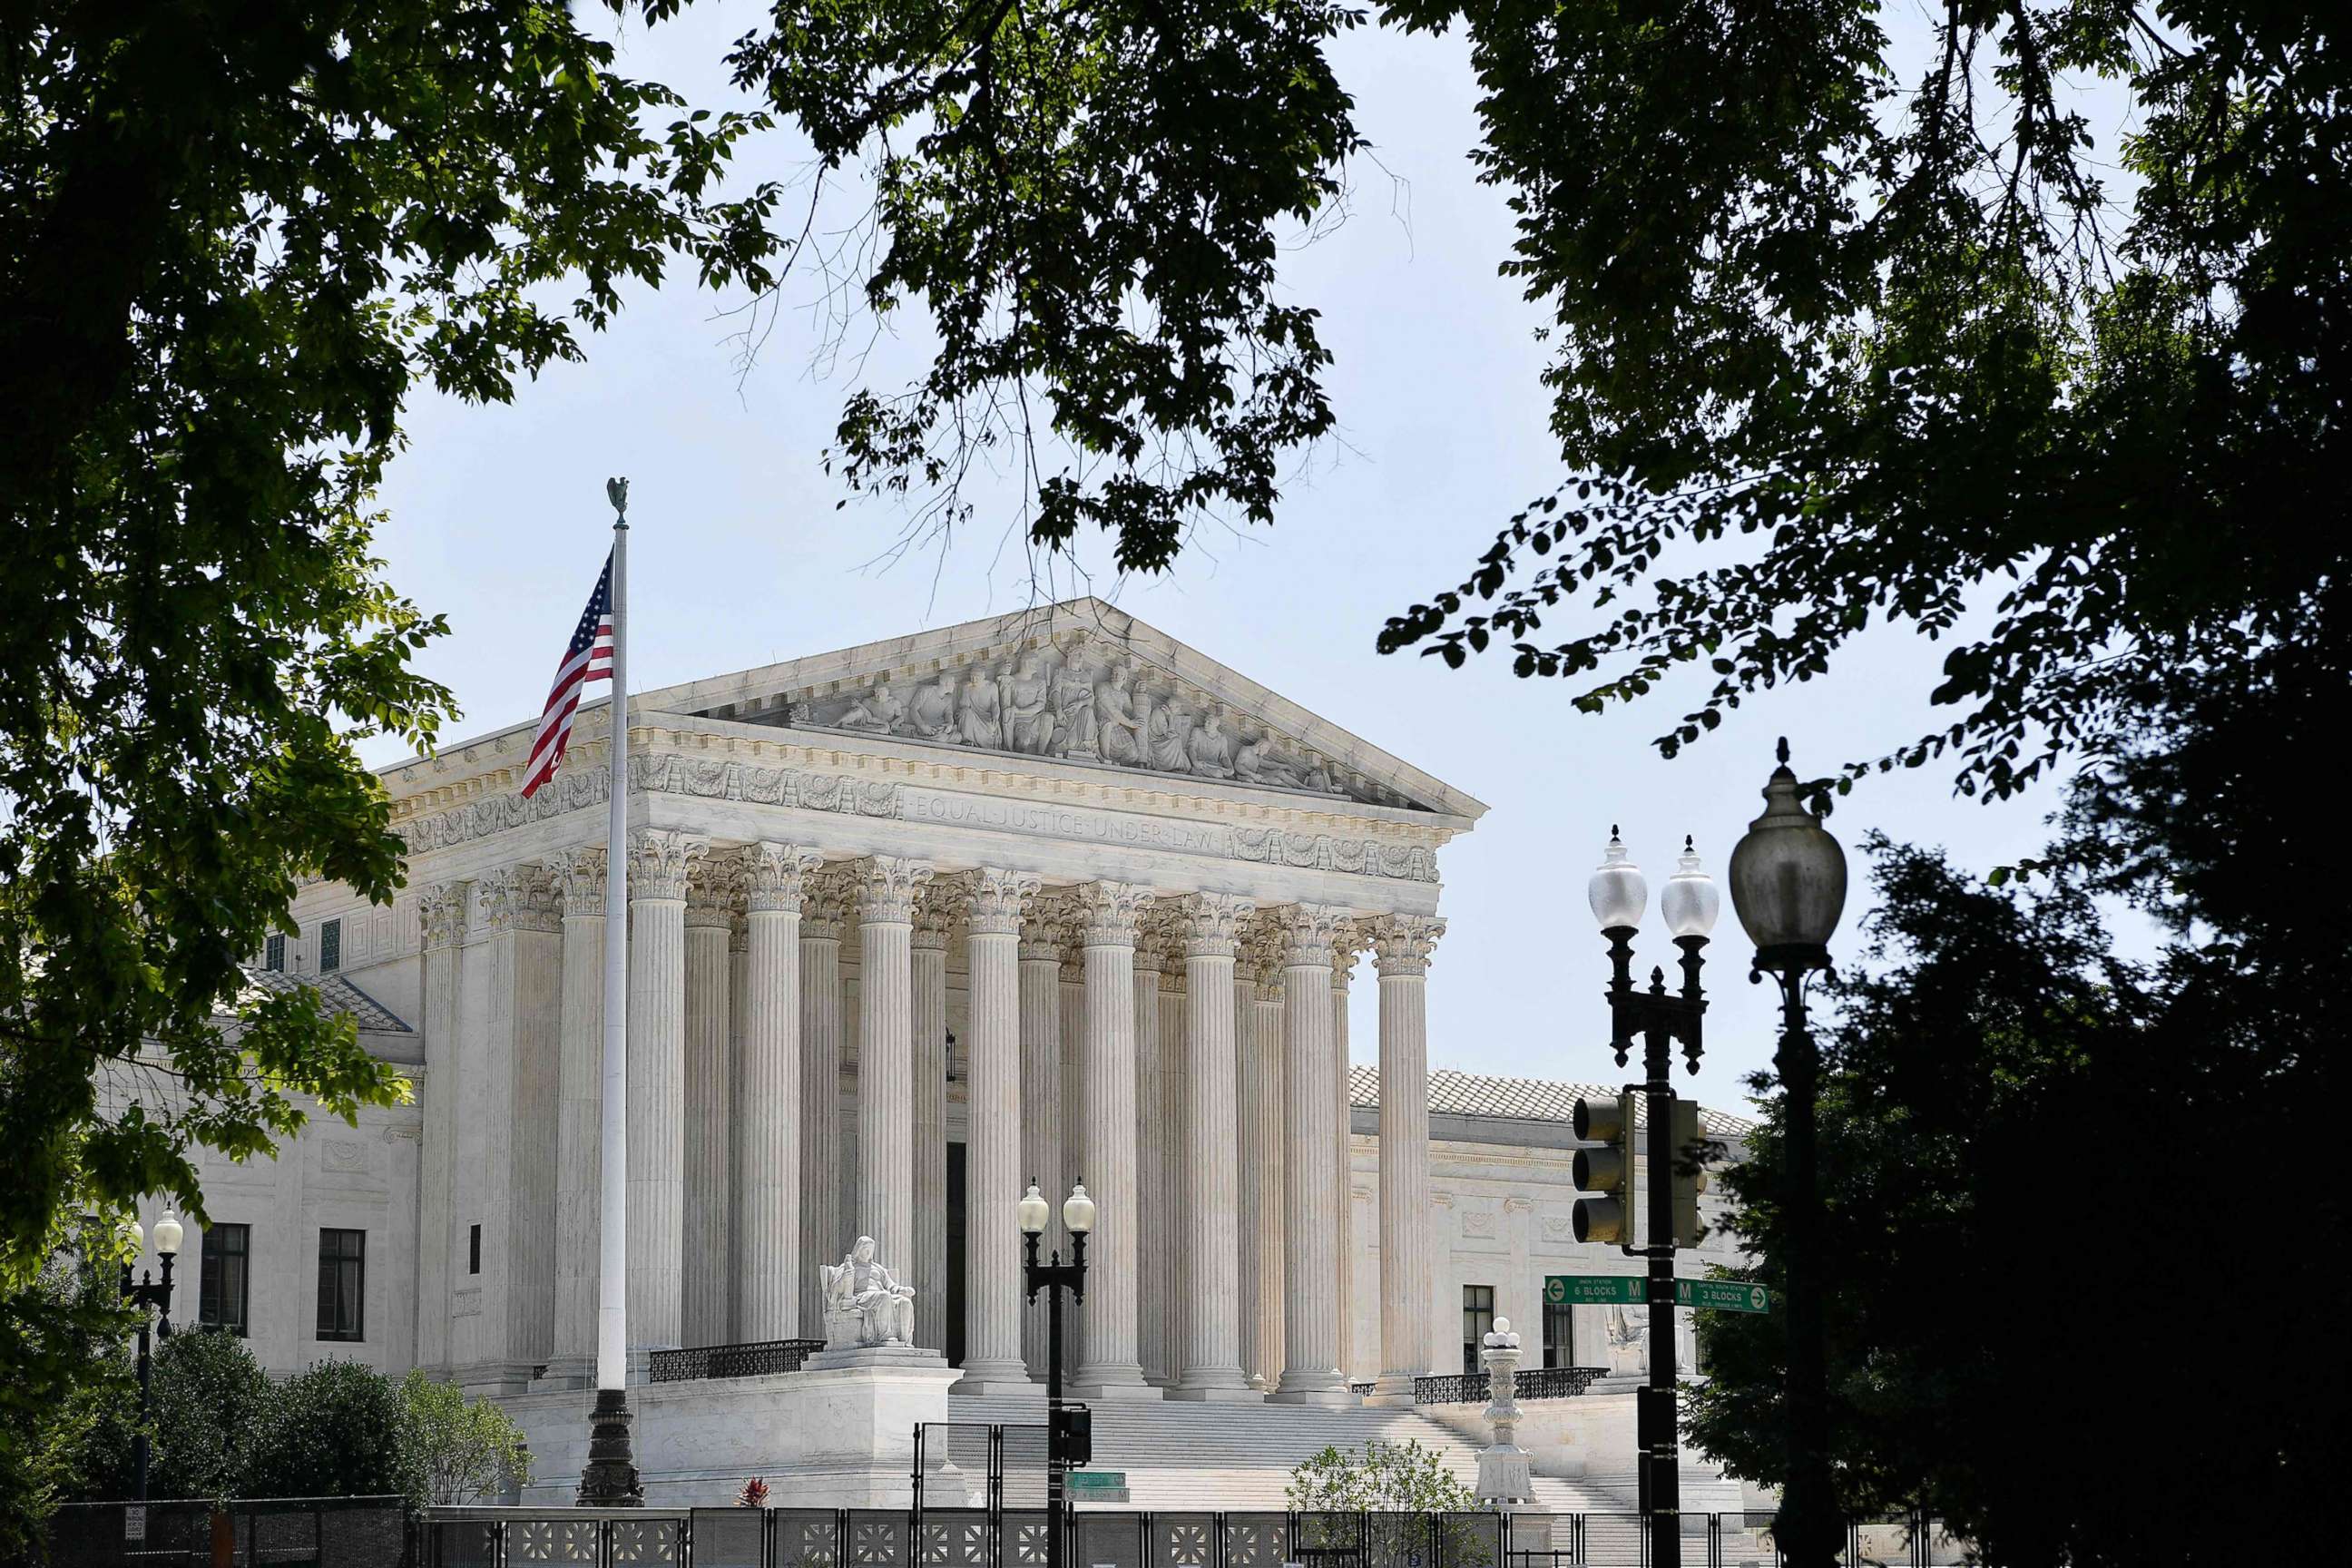 PHOTO: The Supreme Court is seen in Washington, D.C., July 24, 2022.